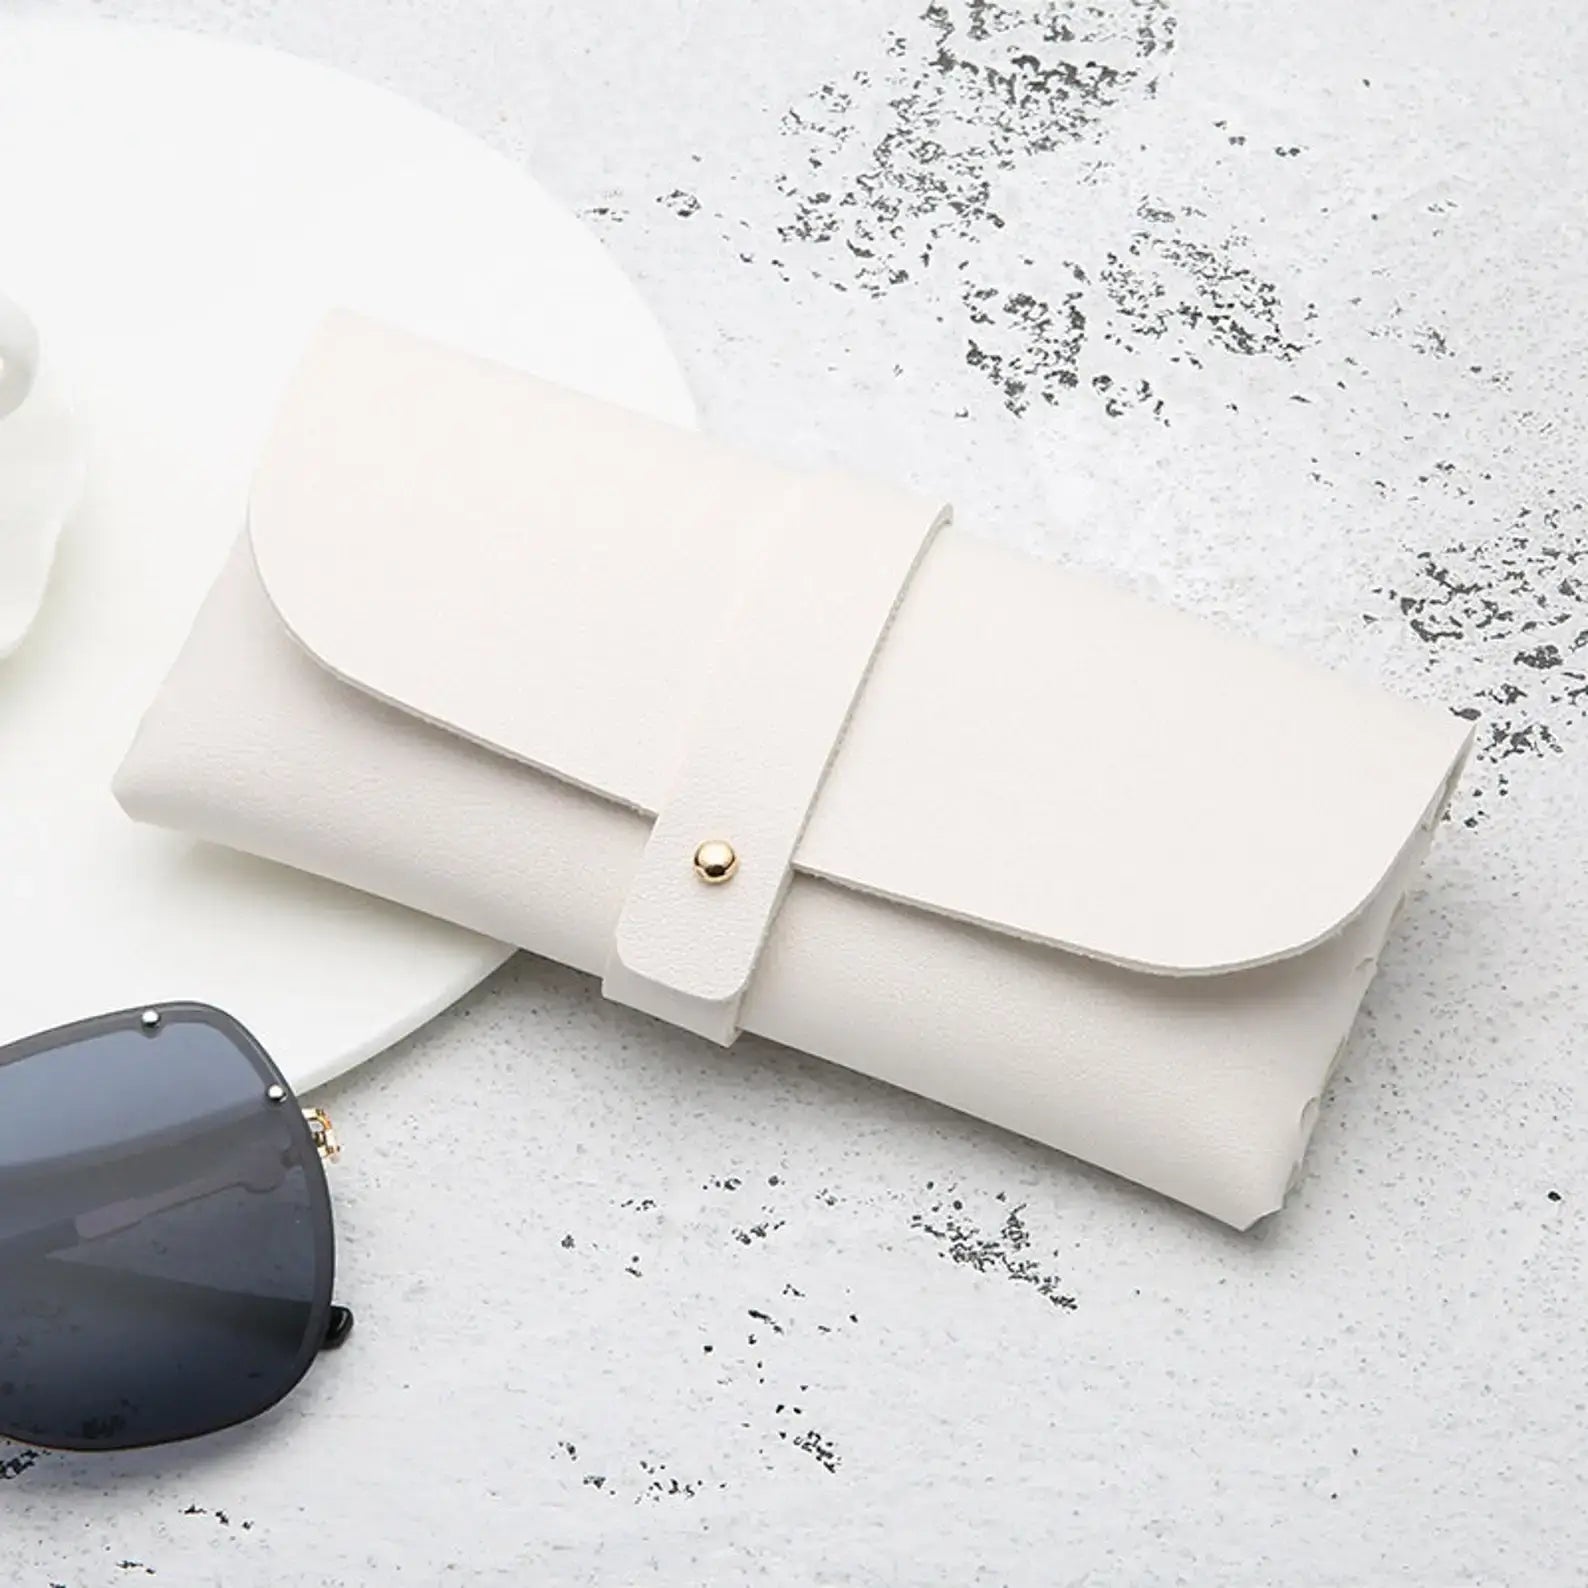 Personalized Handmade Soft Leather Sunglass Glasses Case